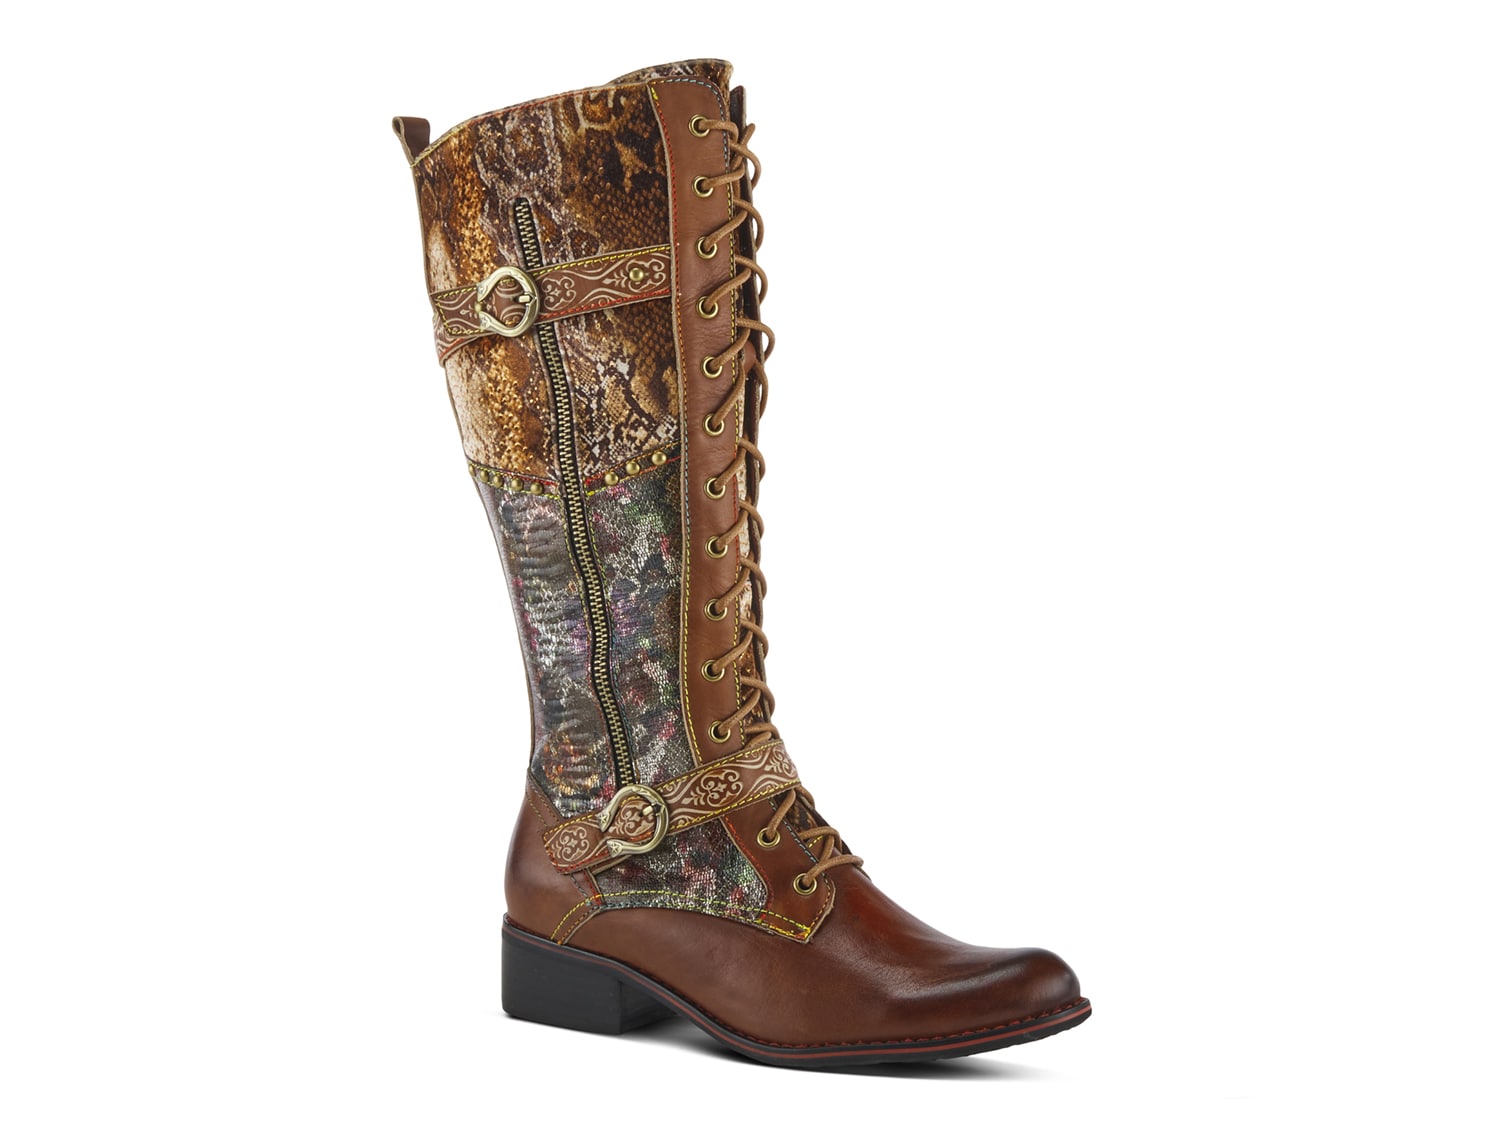 L'Artiste by Spring Step Vaneyck Boot - Free Shipping | DSW